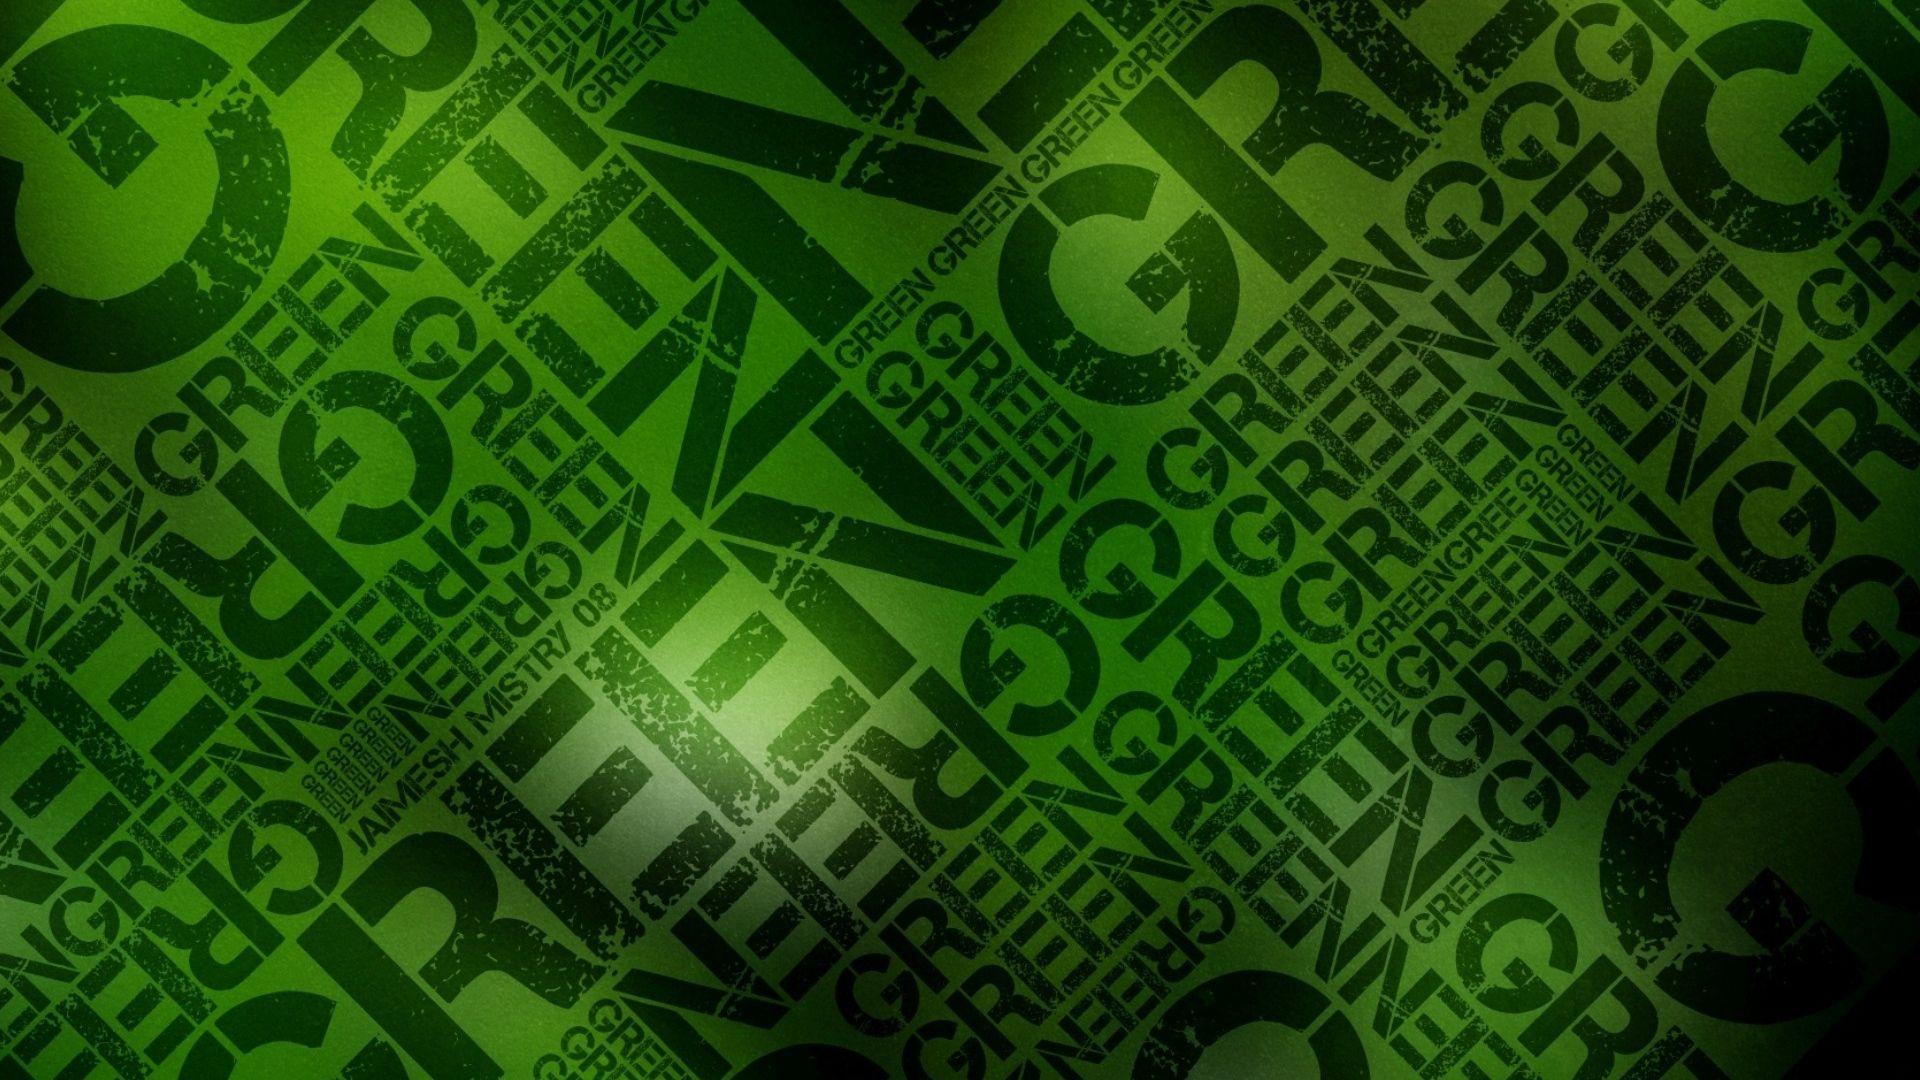 Download Wallpaper 1920x1080 green, black, lettering, wall, letters